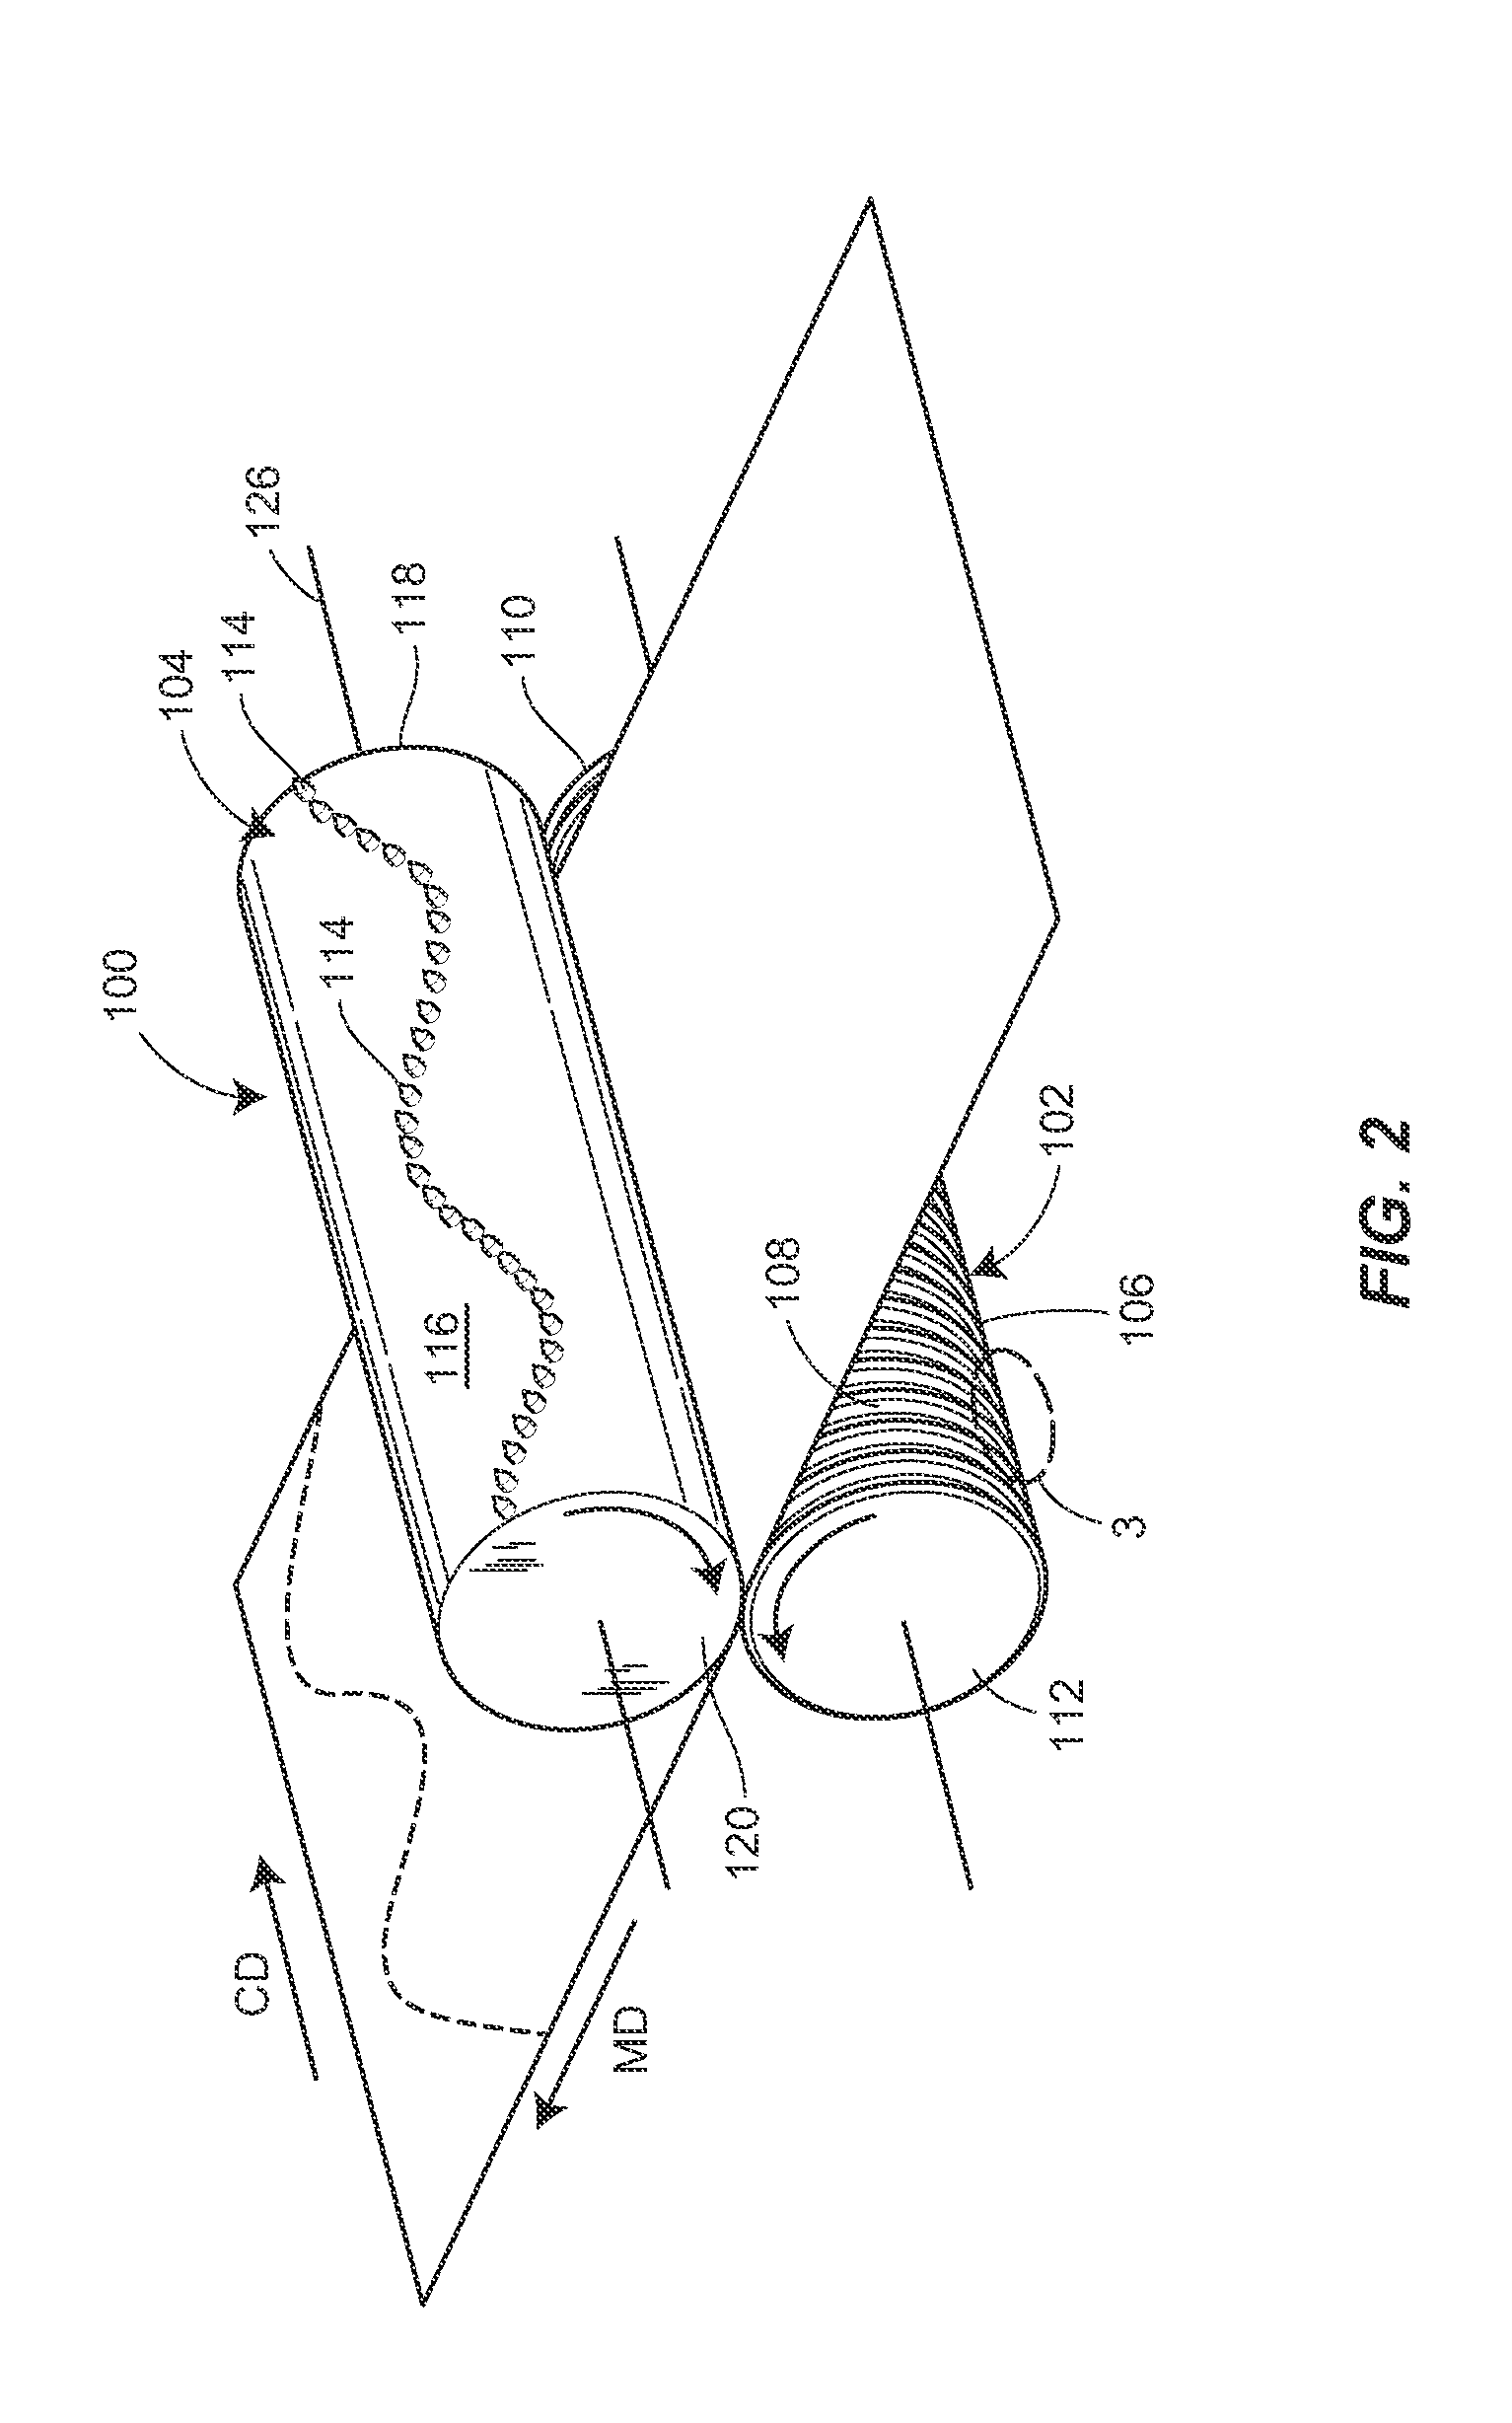 Apparatus for perforating a web material